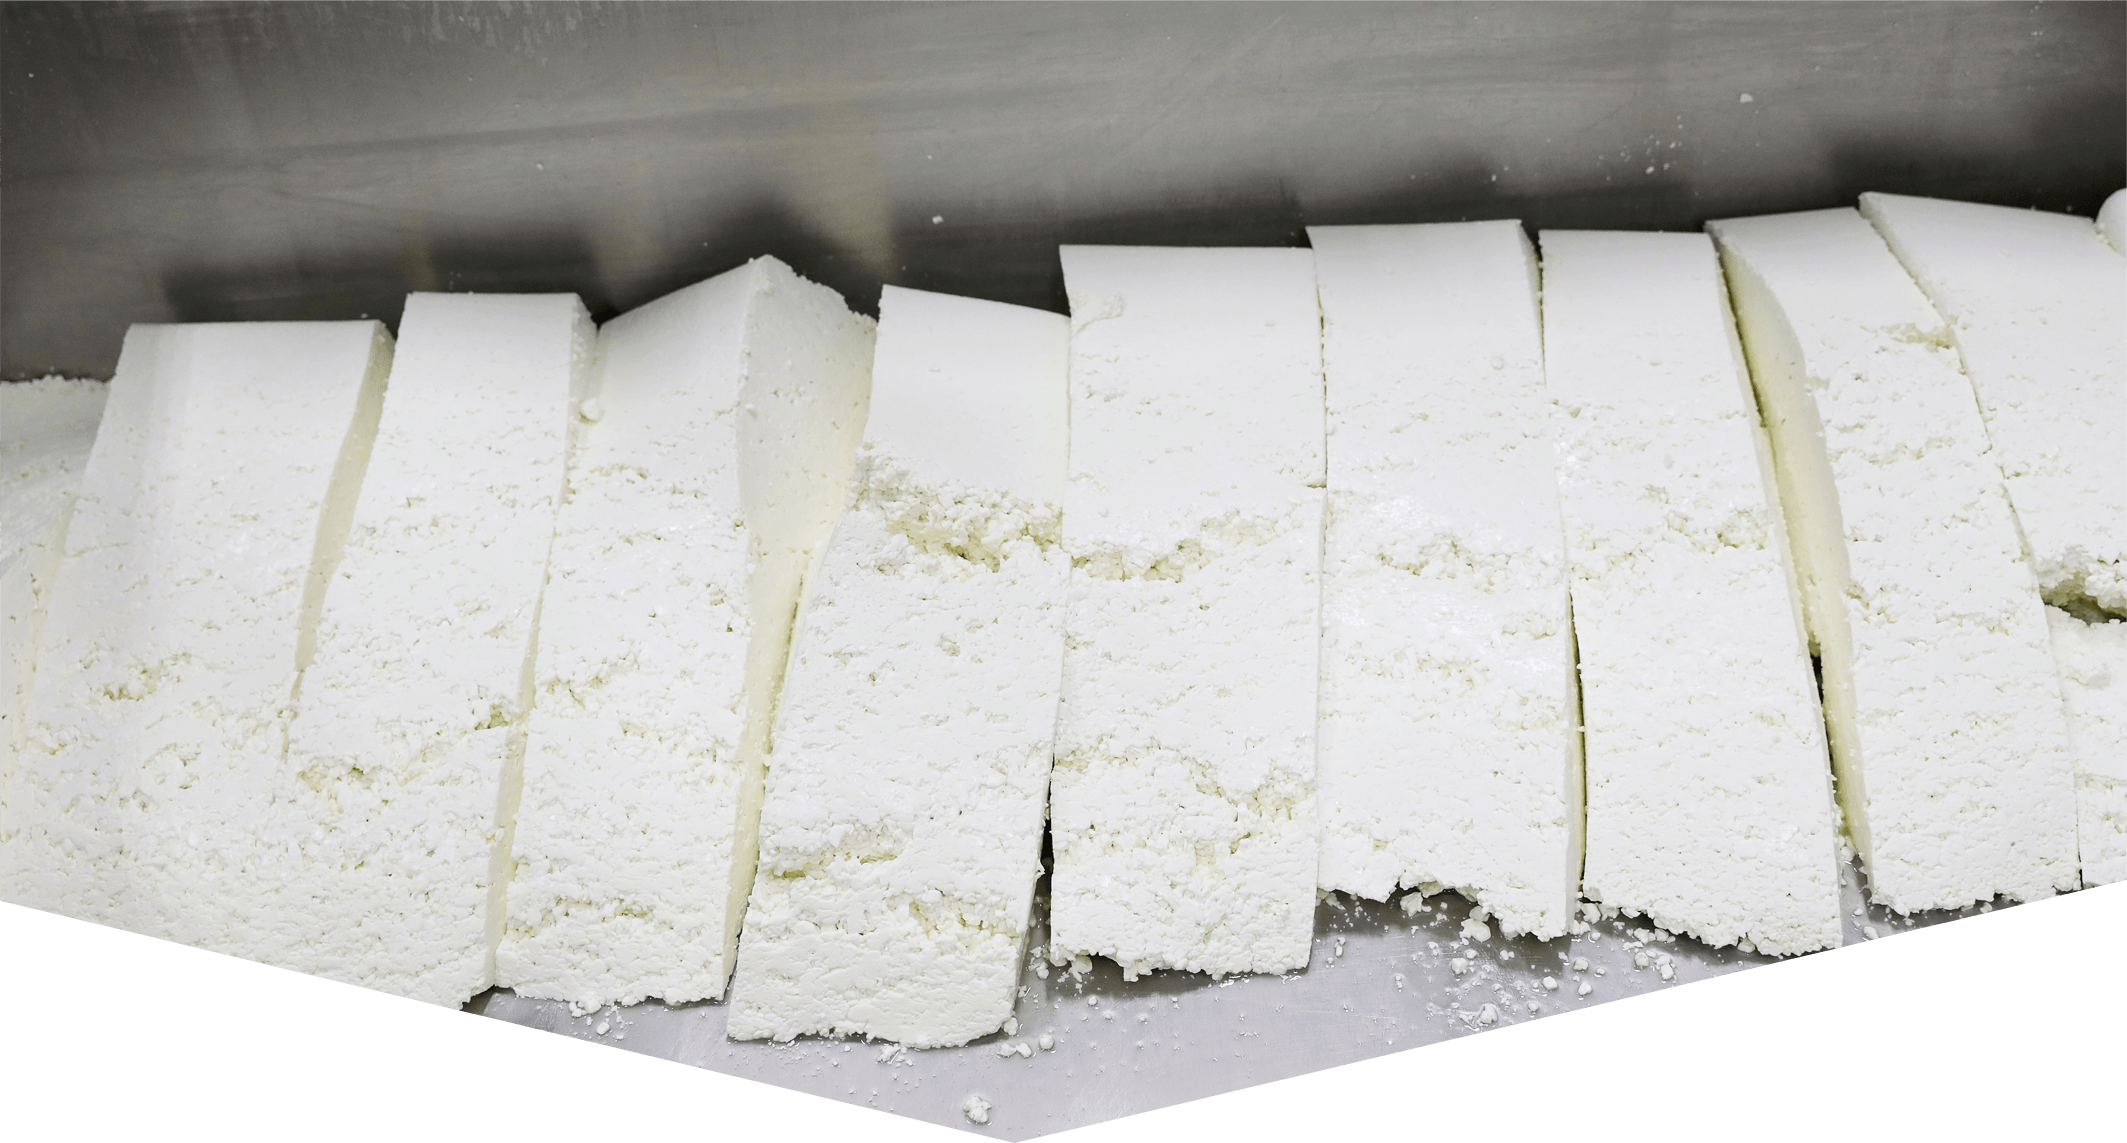 Goat Cheese 101